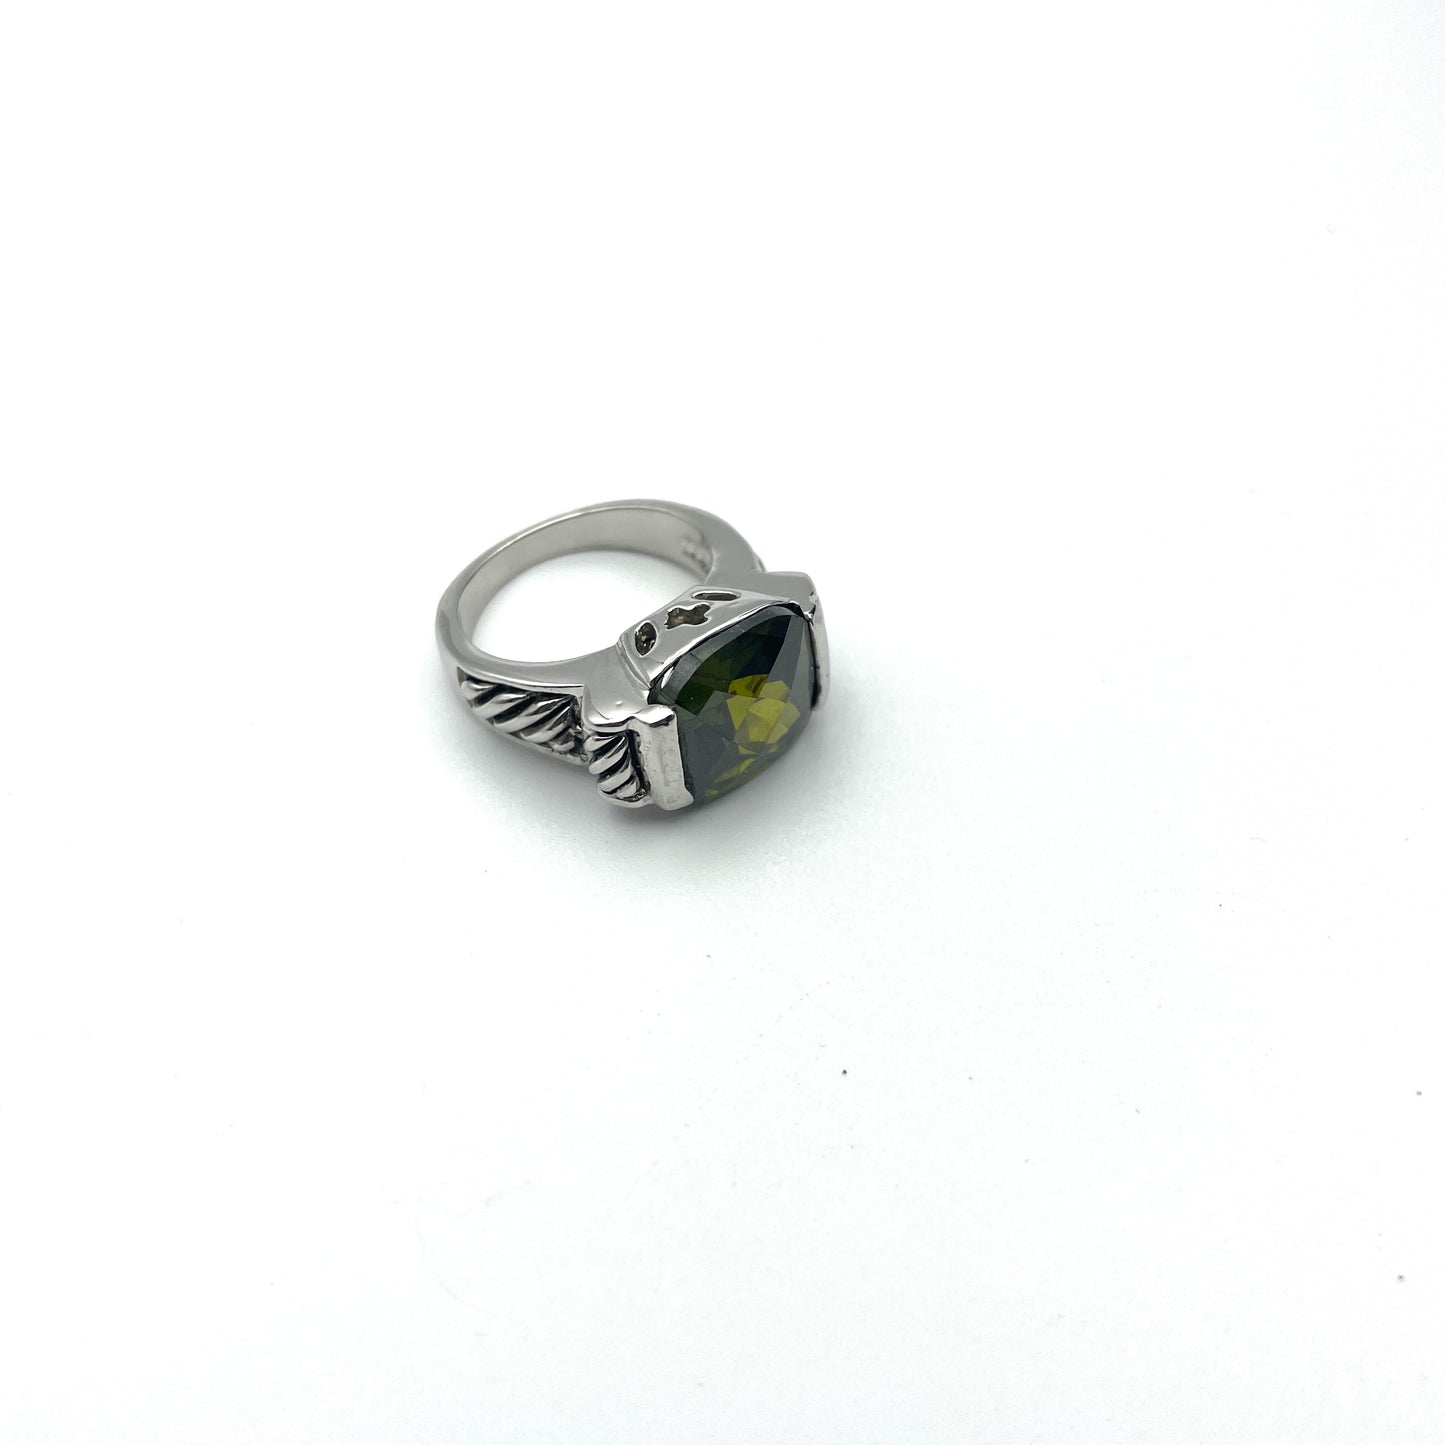 Vintage Green Stone & Silver Ring - Size 6.5